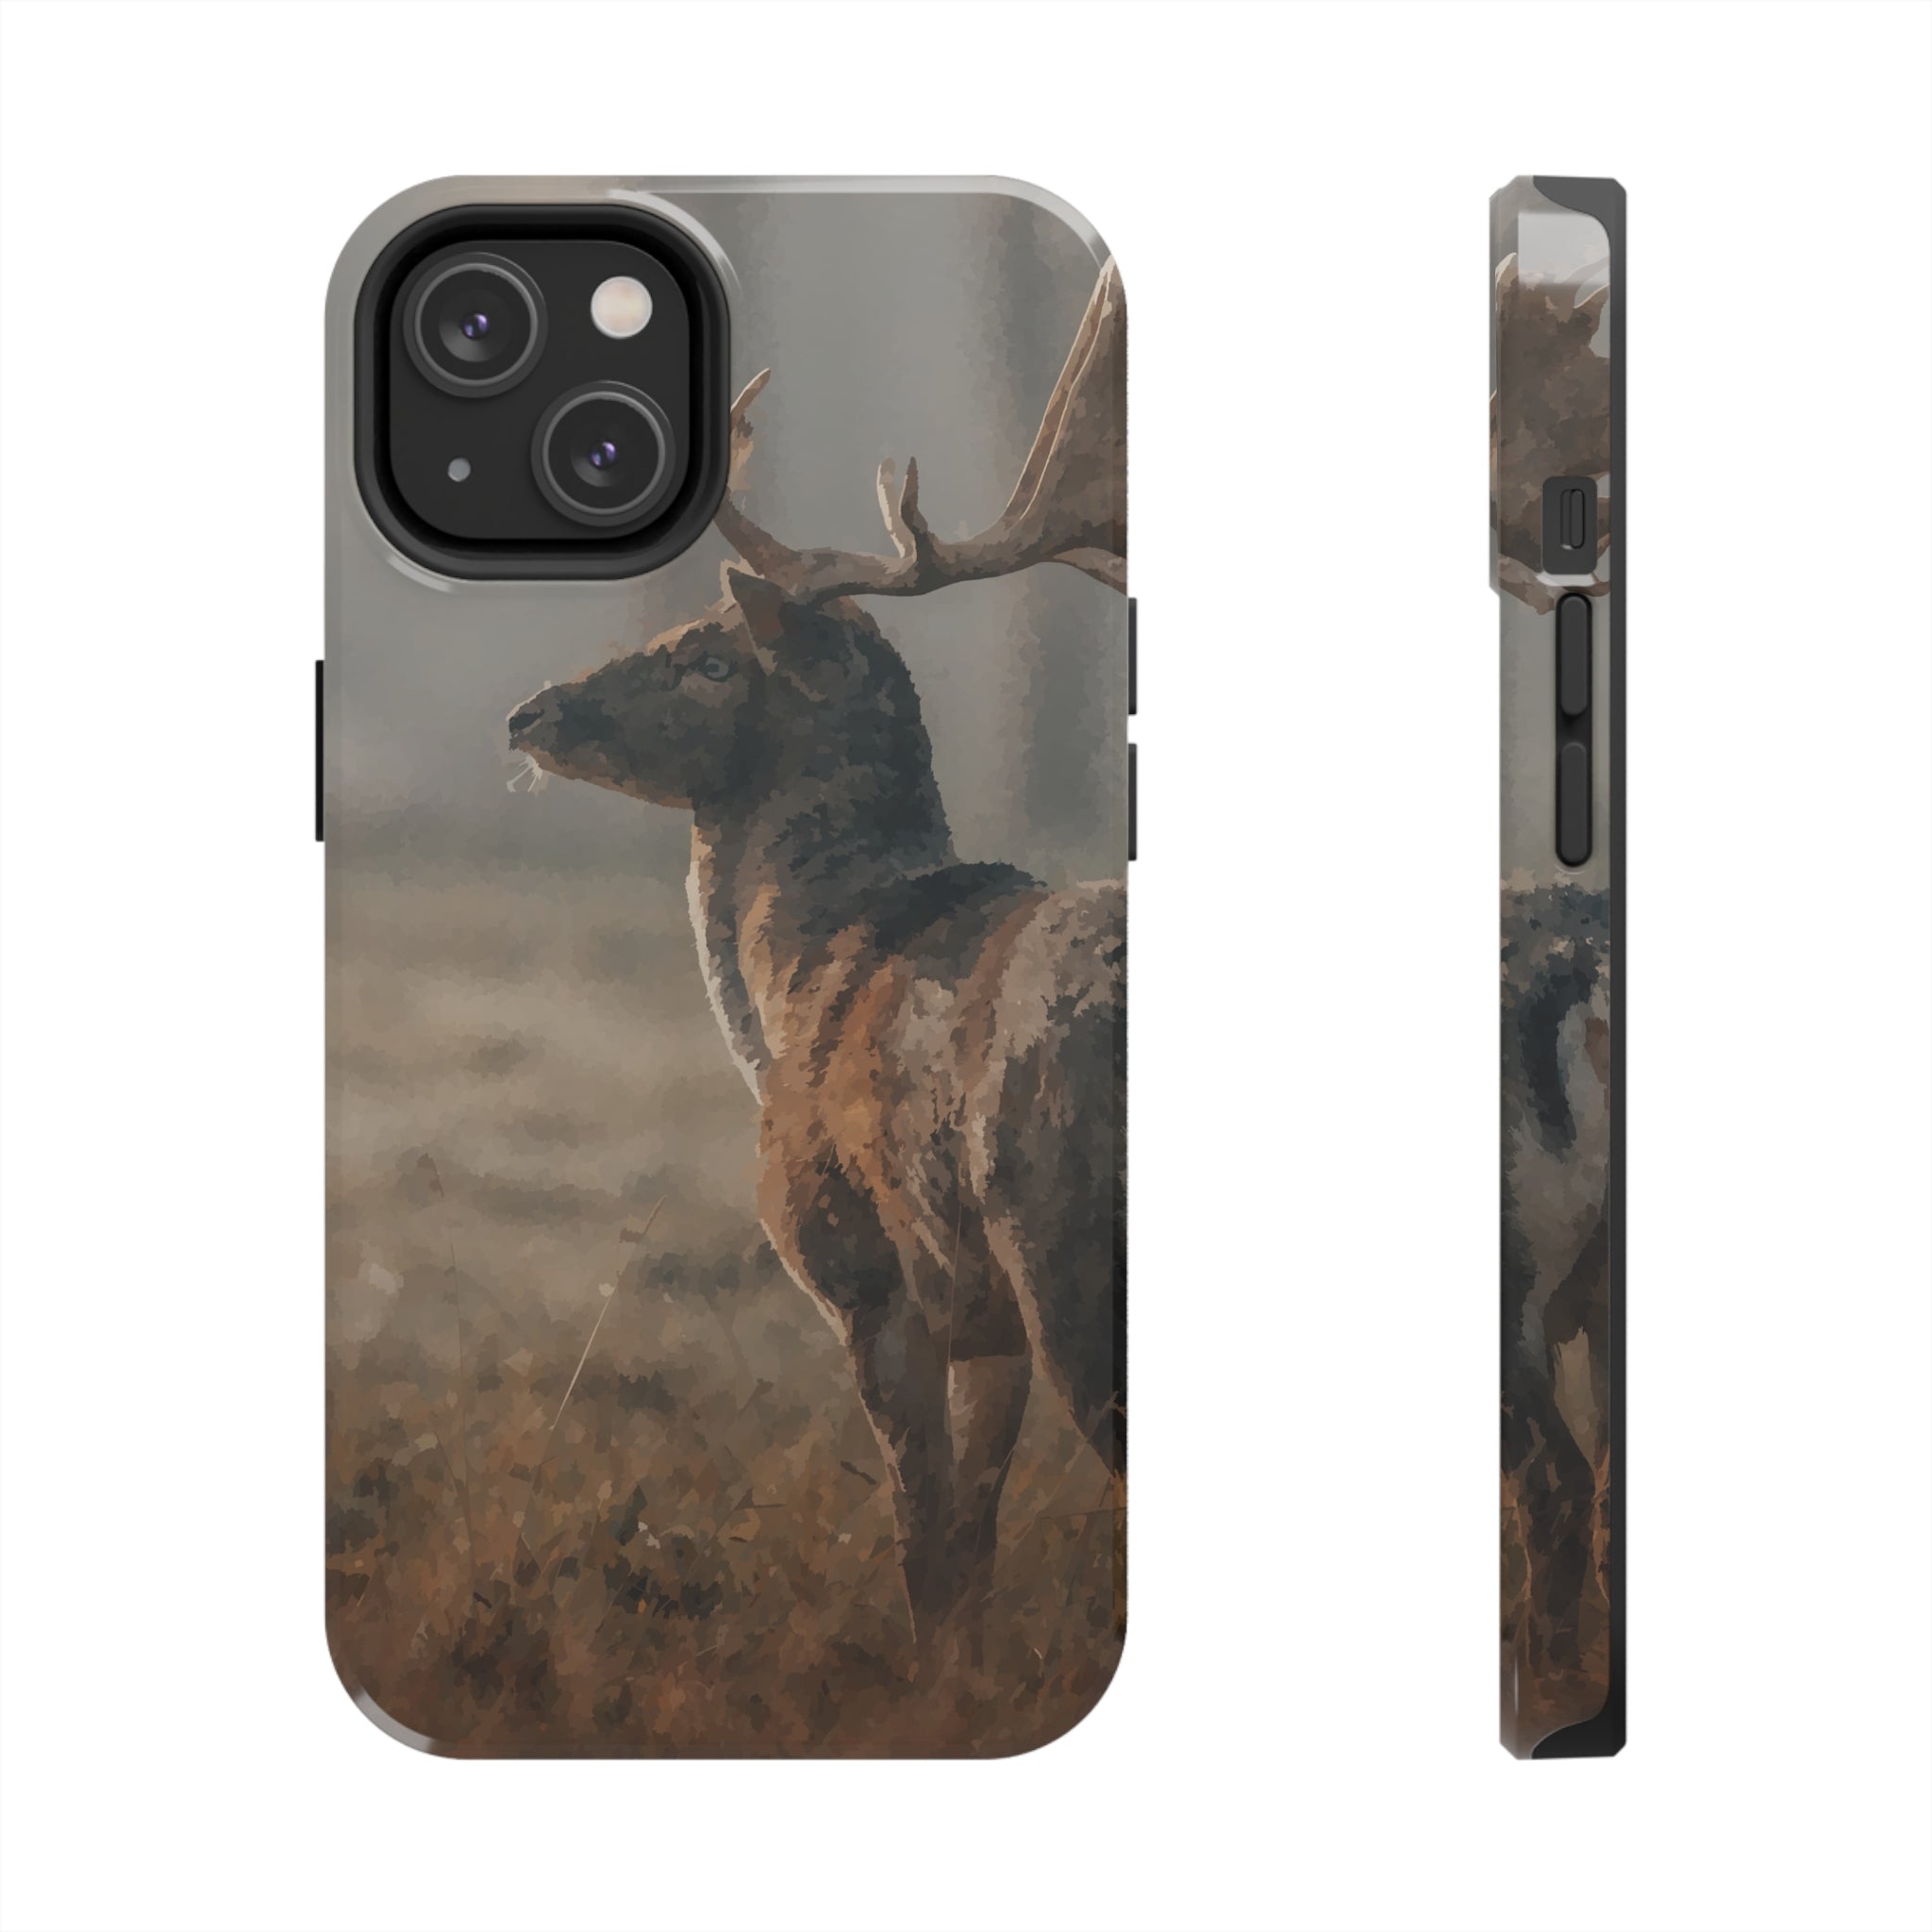 Main image of Forest Deer iPhone Case